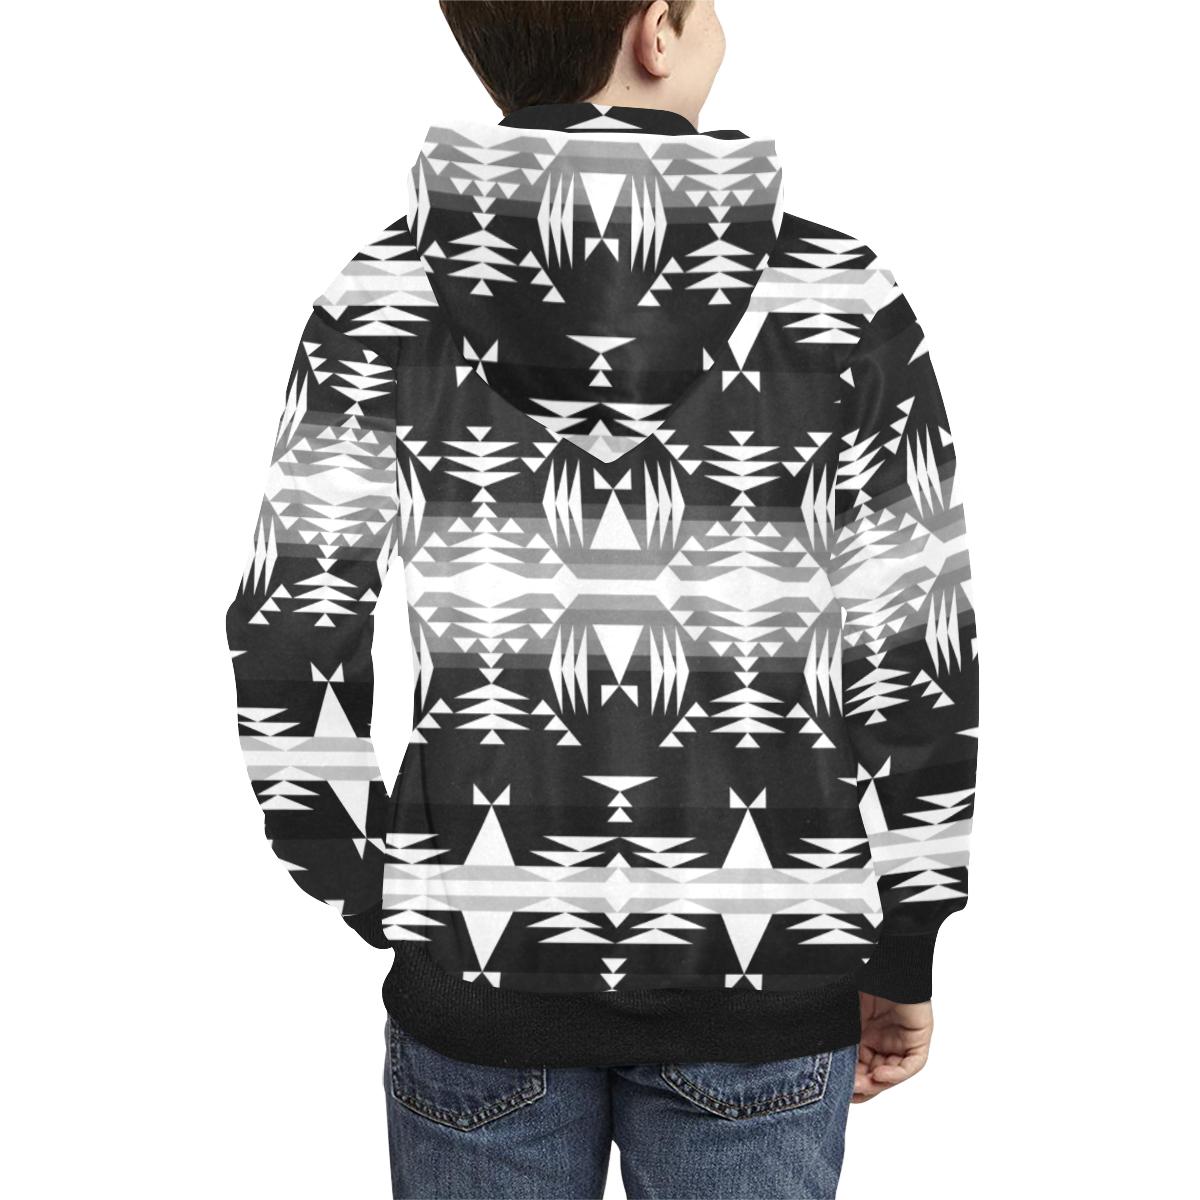 Between the Mountains Black and White Kids' All Over Print Hoodie (Model H38) Kids' AOP Hoodie (H38) e-joyer 